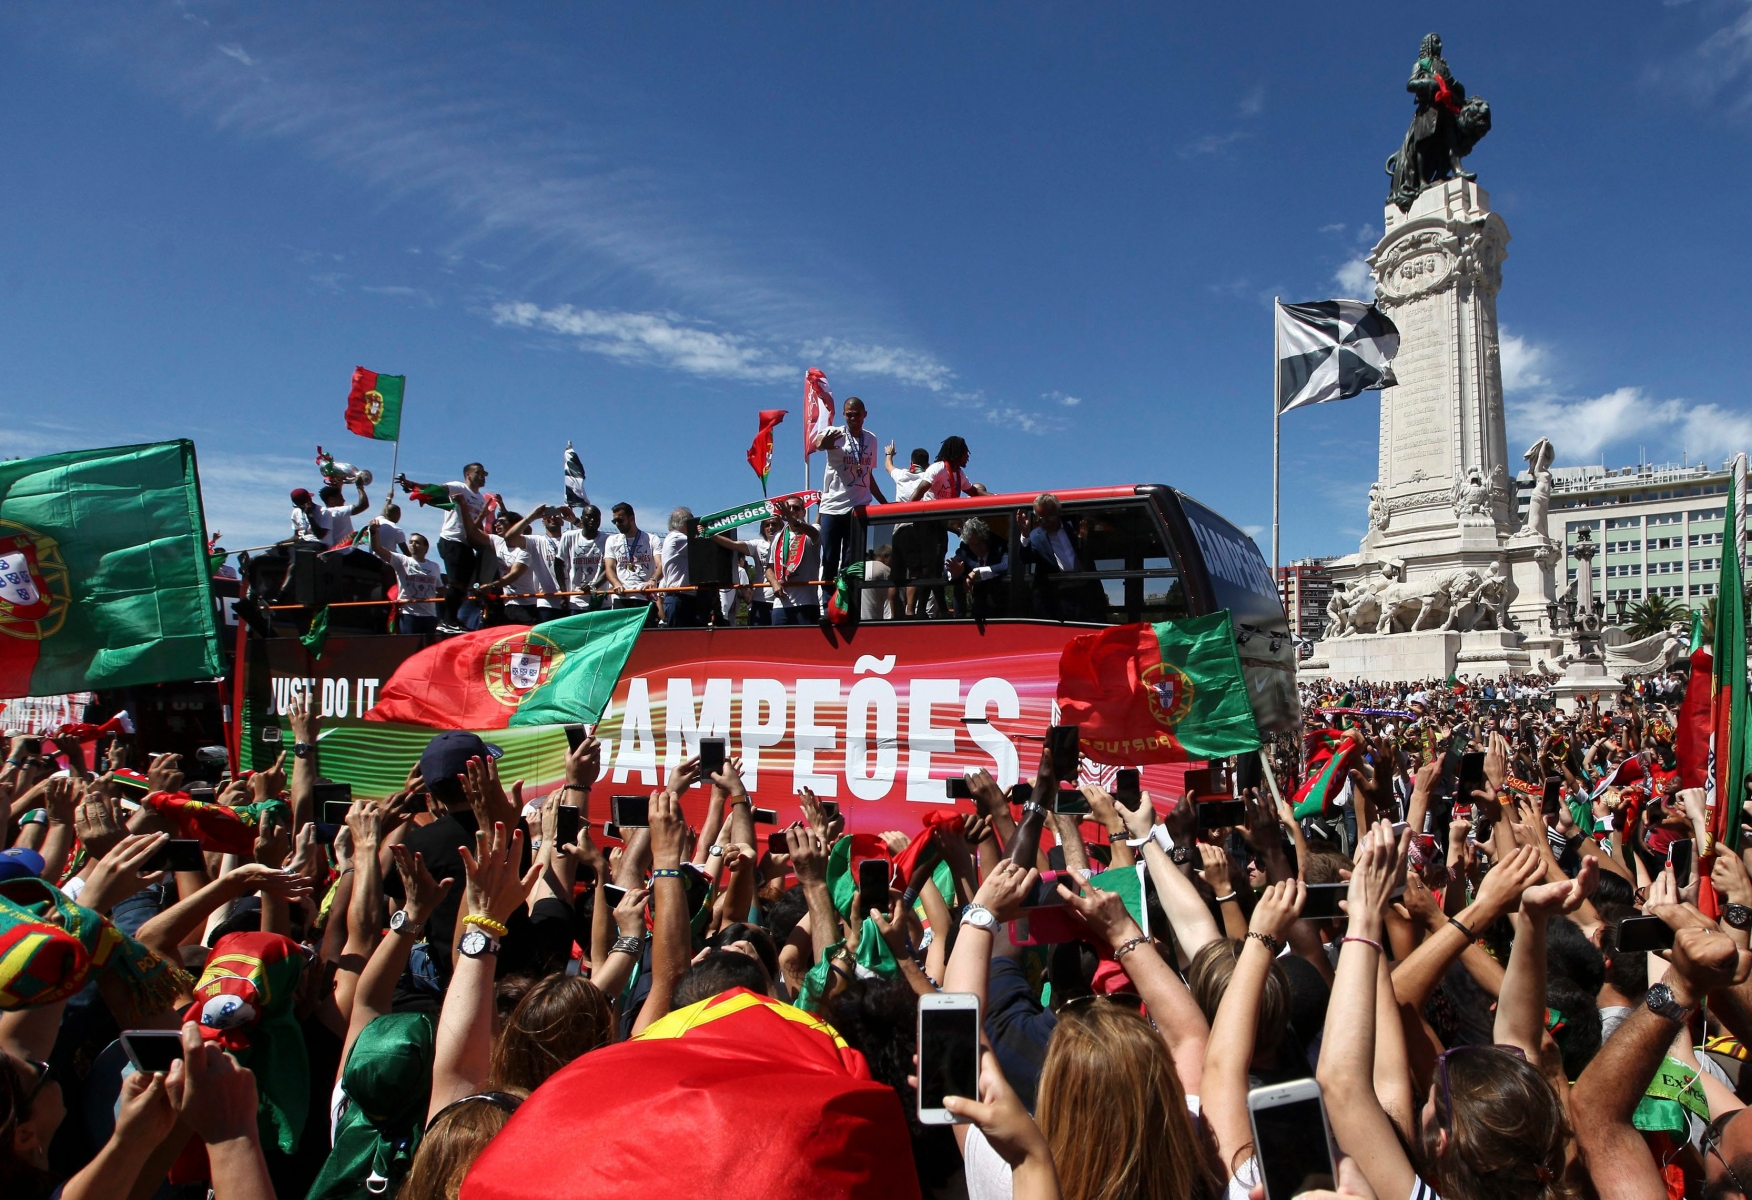 epa05420772 Portugal national soccer team supporters waving Portuguese flags and scarfs at Marquis of Pombal square as the Portuguese Team crosses Lisbon downtown, Portugal, 11 July 2016. The Portugal national soccer team on 10 July 2016 had won the UEFA Euro 2016 final against France by 1-0 to win the title for first time.  EPA/NUNO VEIGA PORTUGAL SOCCER UEFA EURO 2016